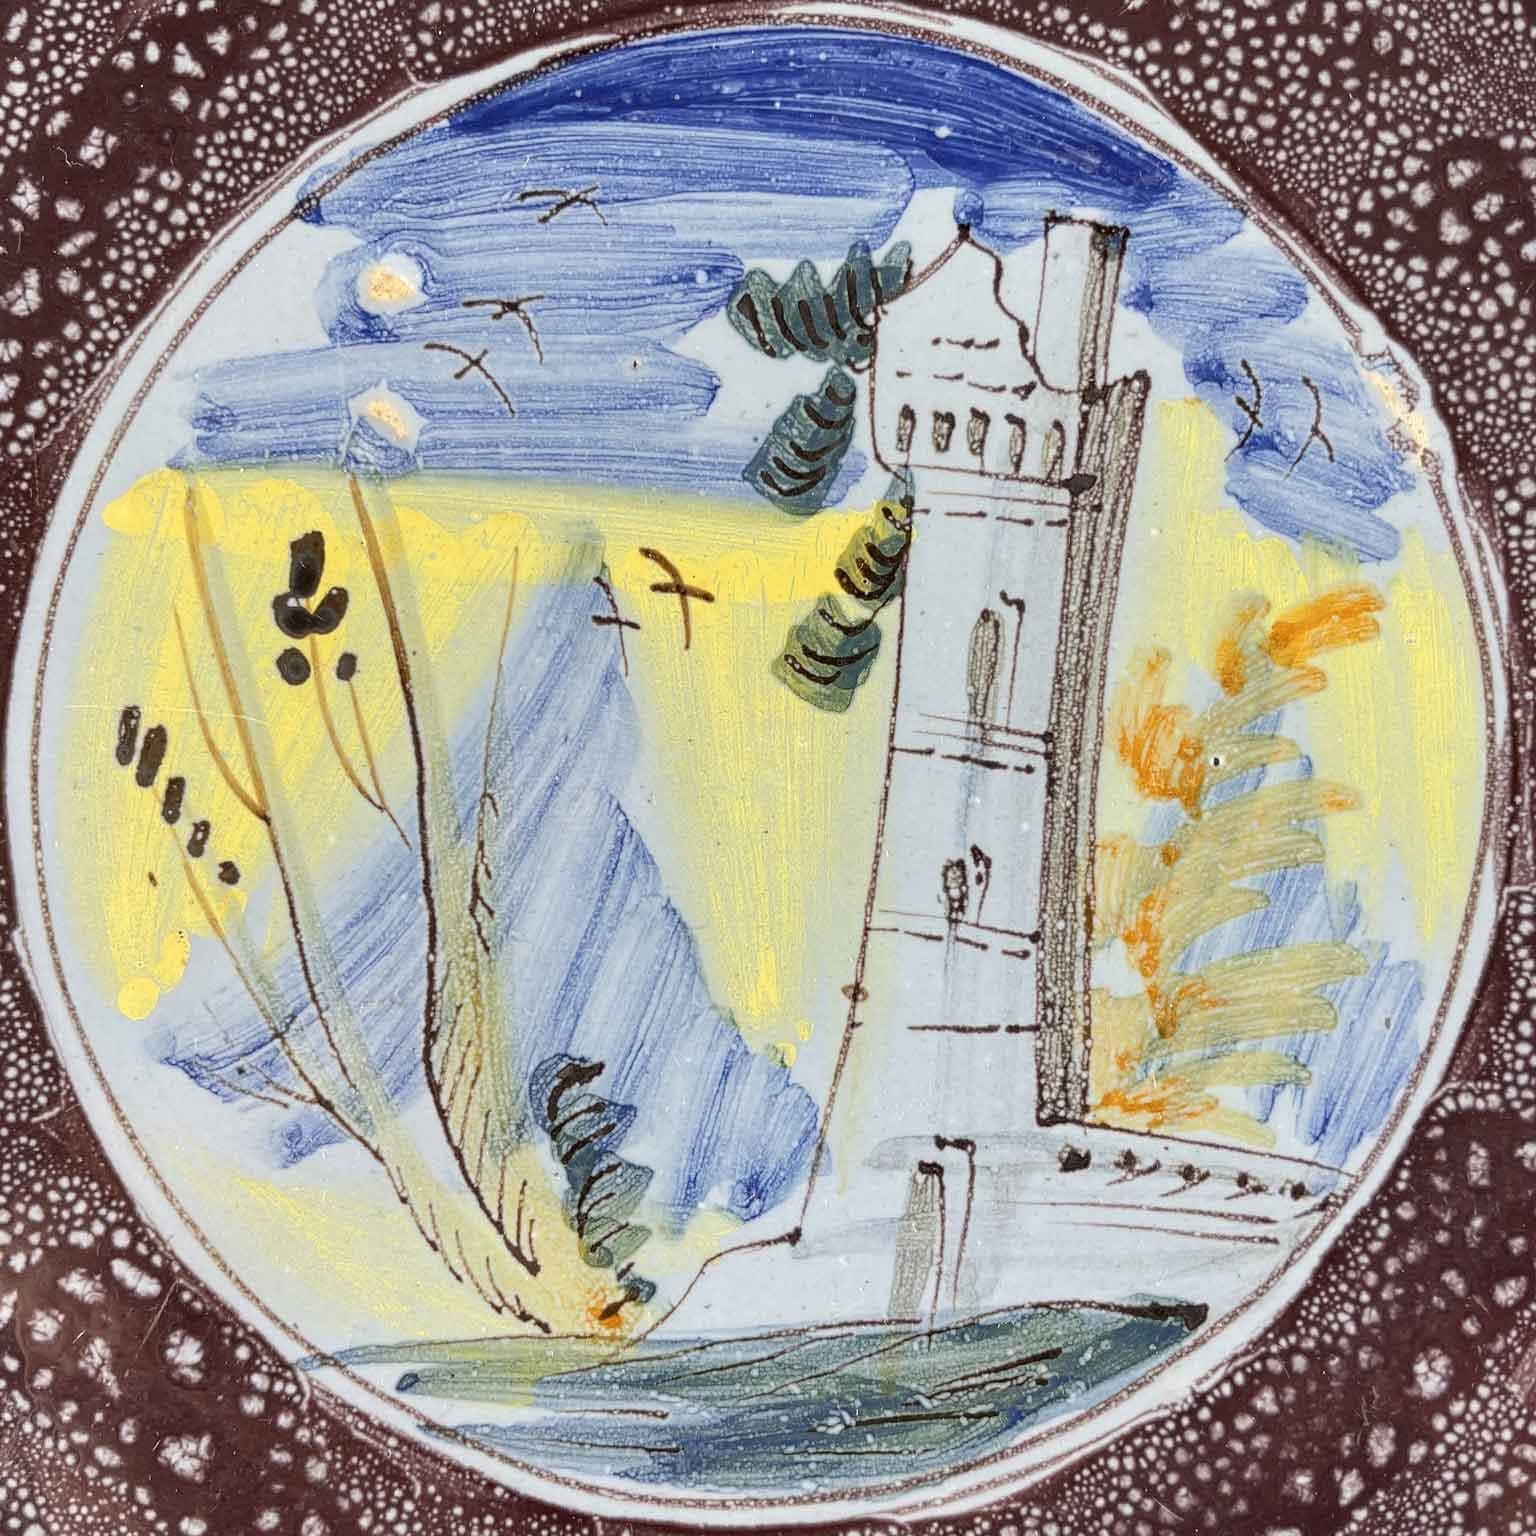 An Italian maiolica berrettino-ground riser from 18th century, central Italy, probably Faenza origin. In the central part of the riser a ruined tower is painted within a mountain landscape background; the outermost circular part is decorated with a